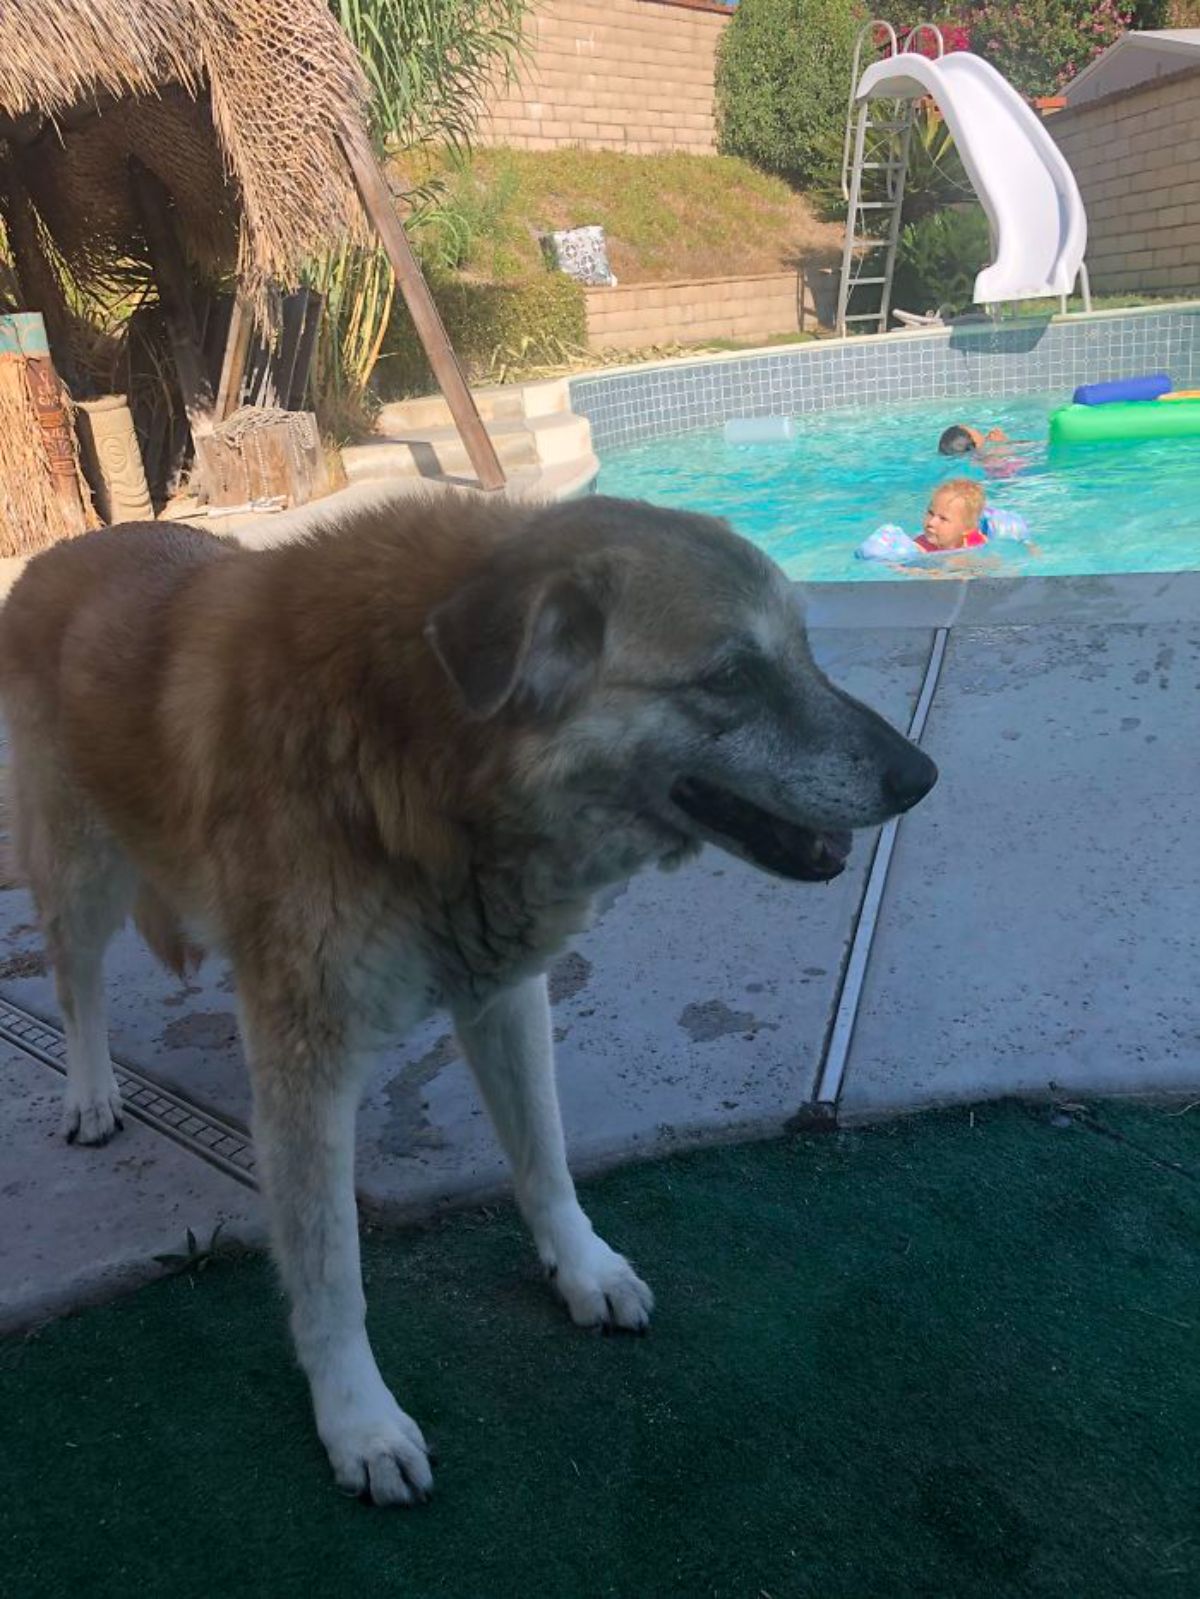 old brown dog standing next to a swimming pool with children swimming